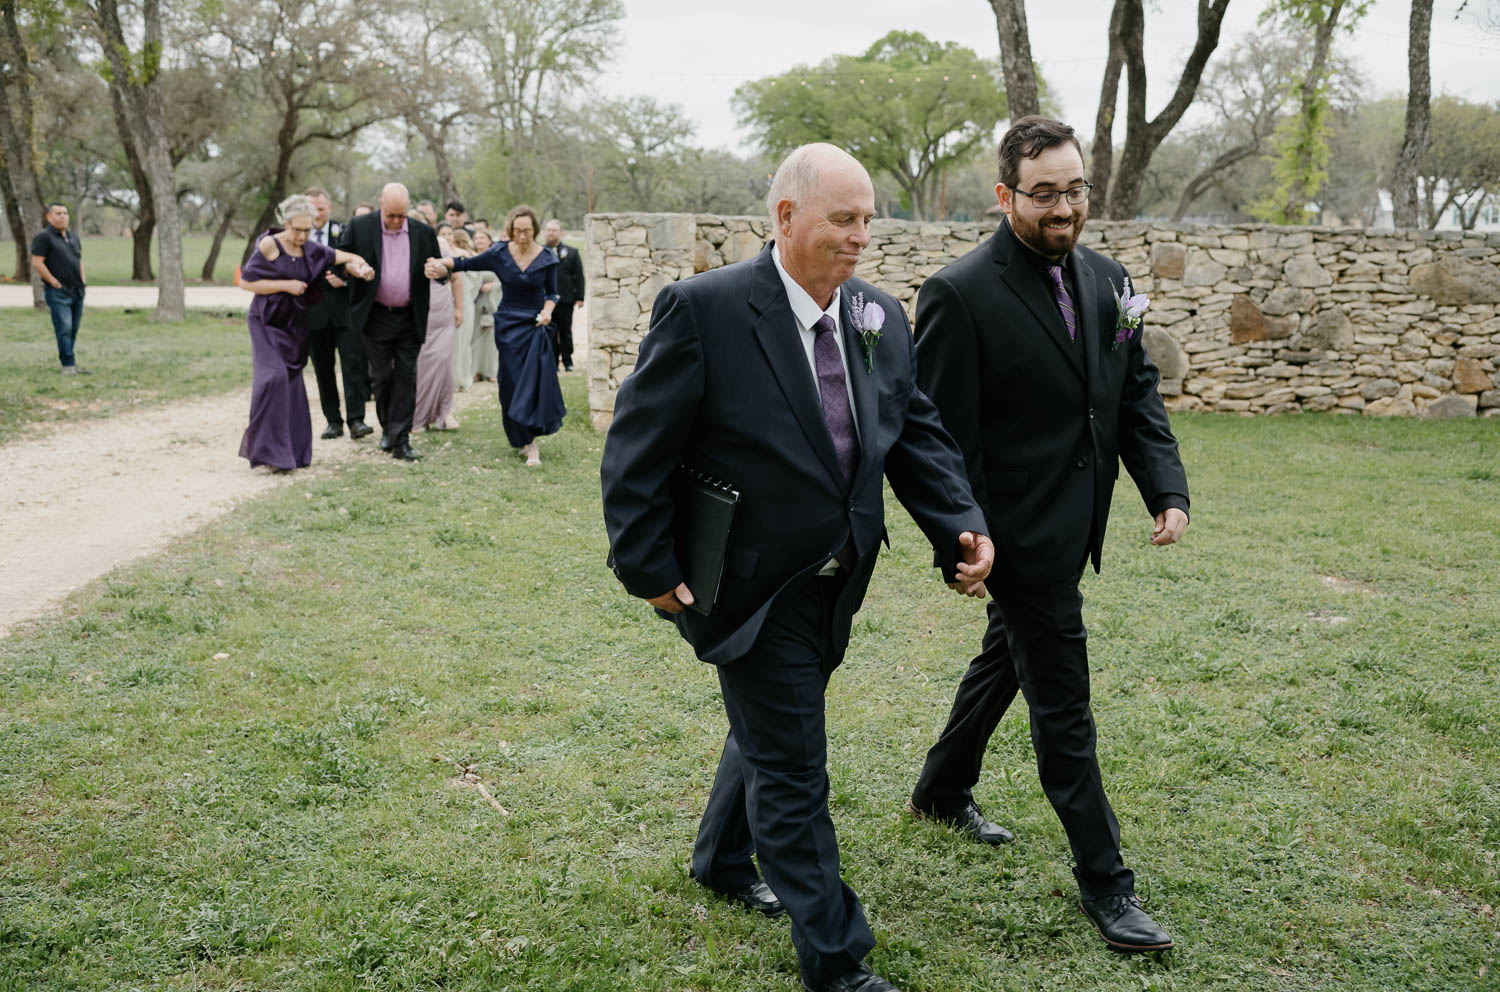 023 Eagle Dancer Ranch Boerne Hill Country Wedding+Reception Philip Thomas Photography